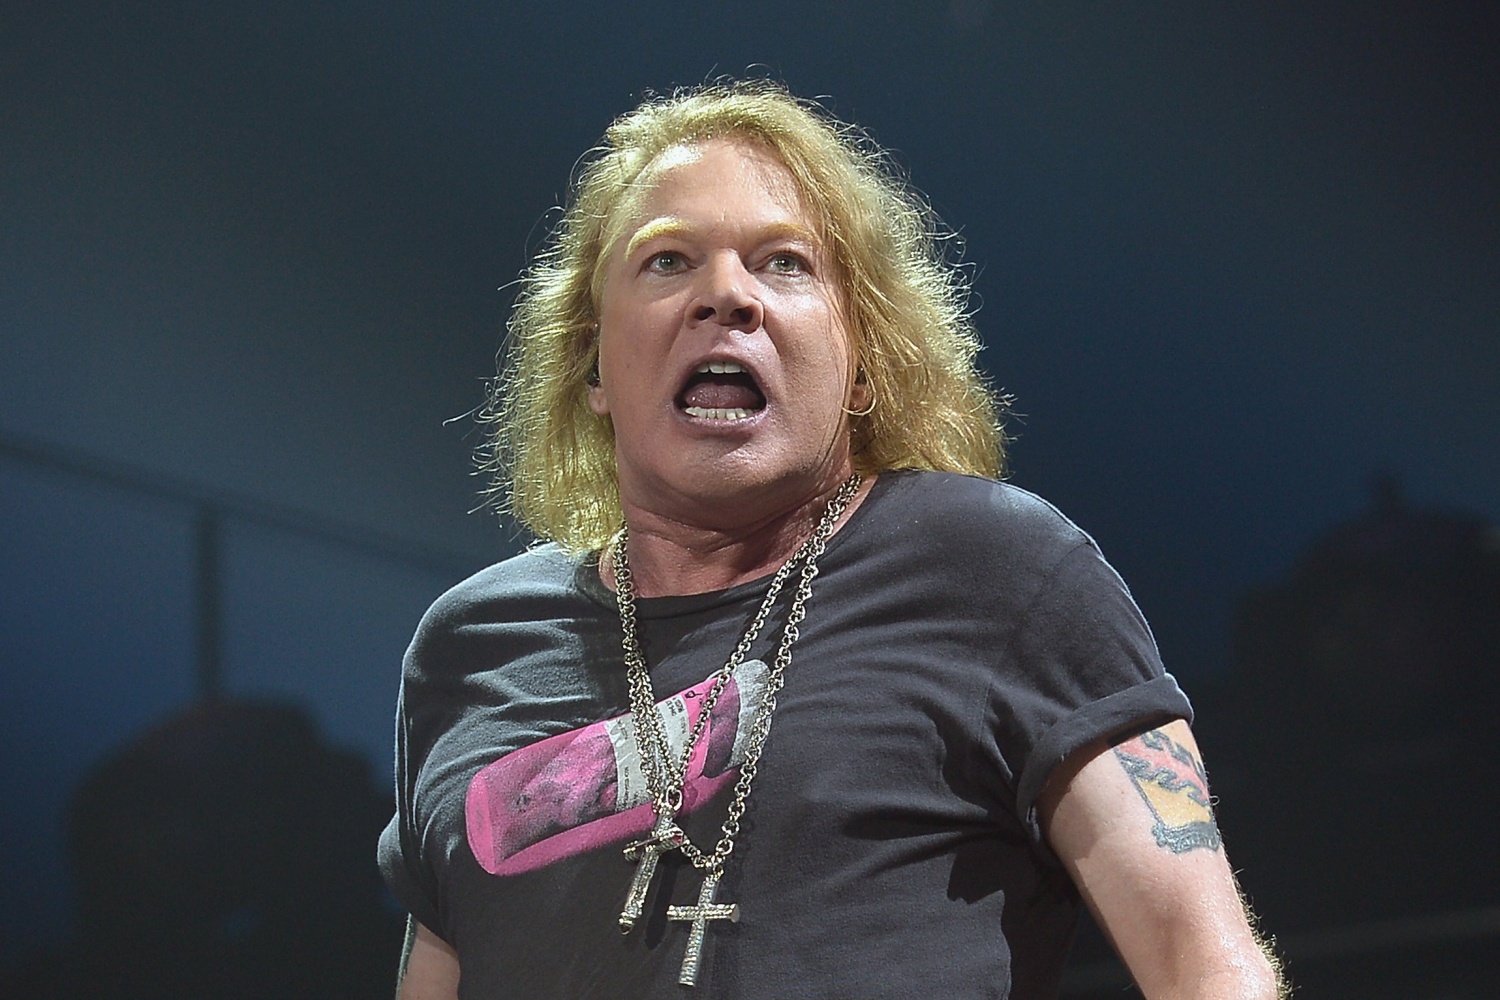 Axl Rose and the 1989 sexual assault case